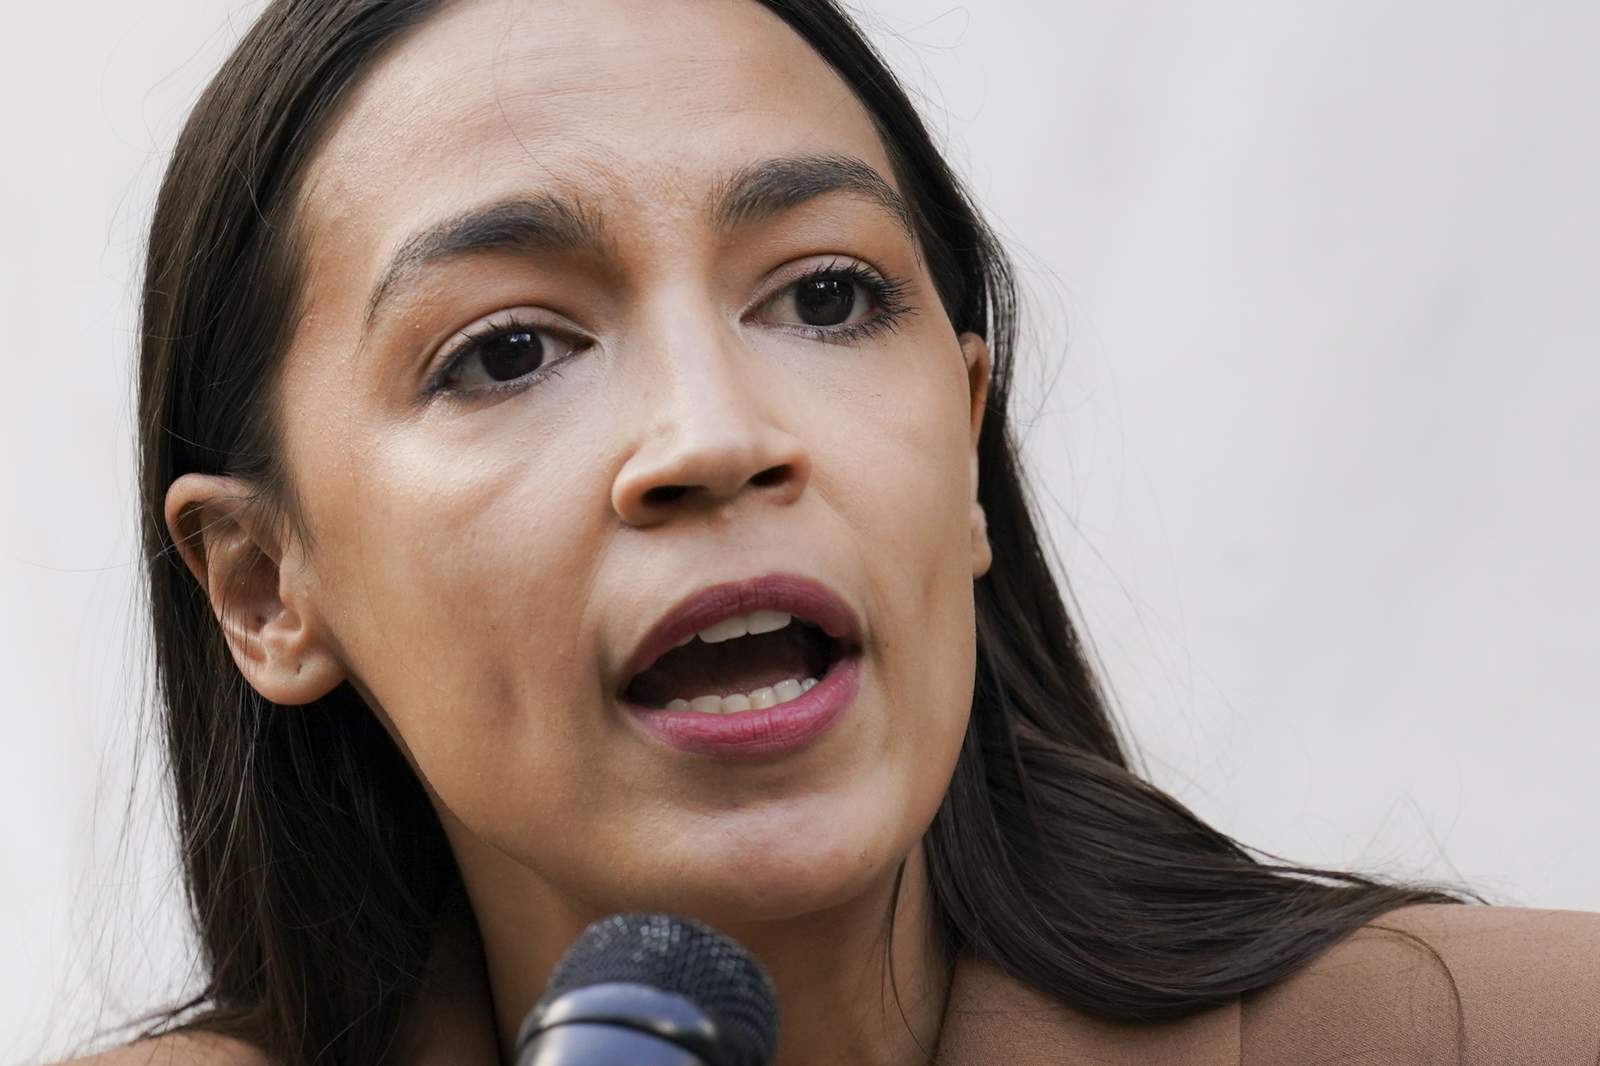 Texas man charged in Capitol riot accused of threatening to ‘assassinate’ Rep. Ocasio-Cortez, FBI says